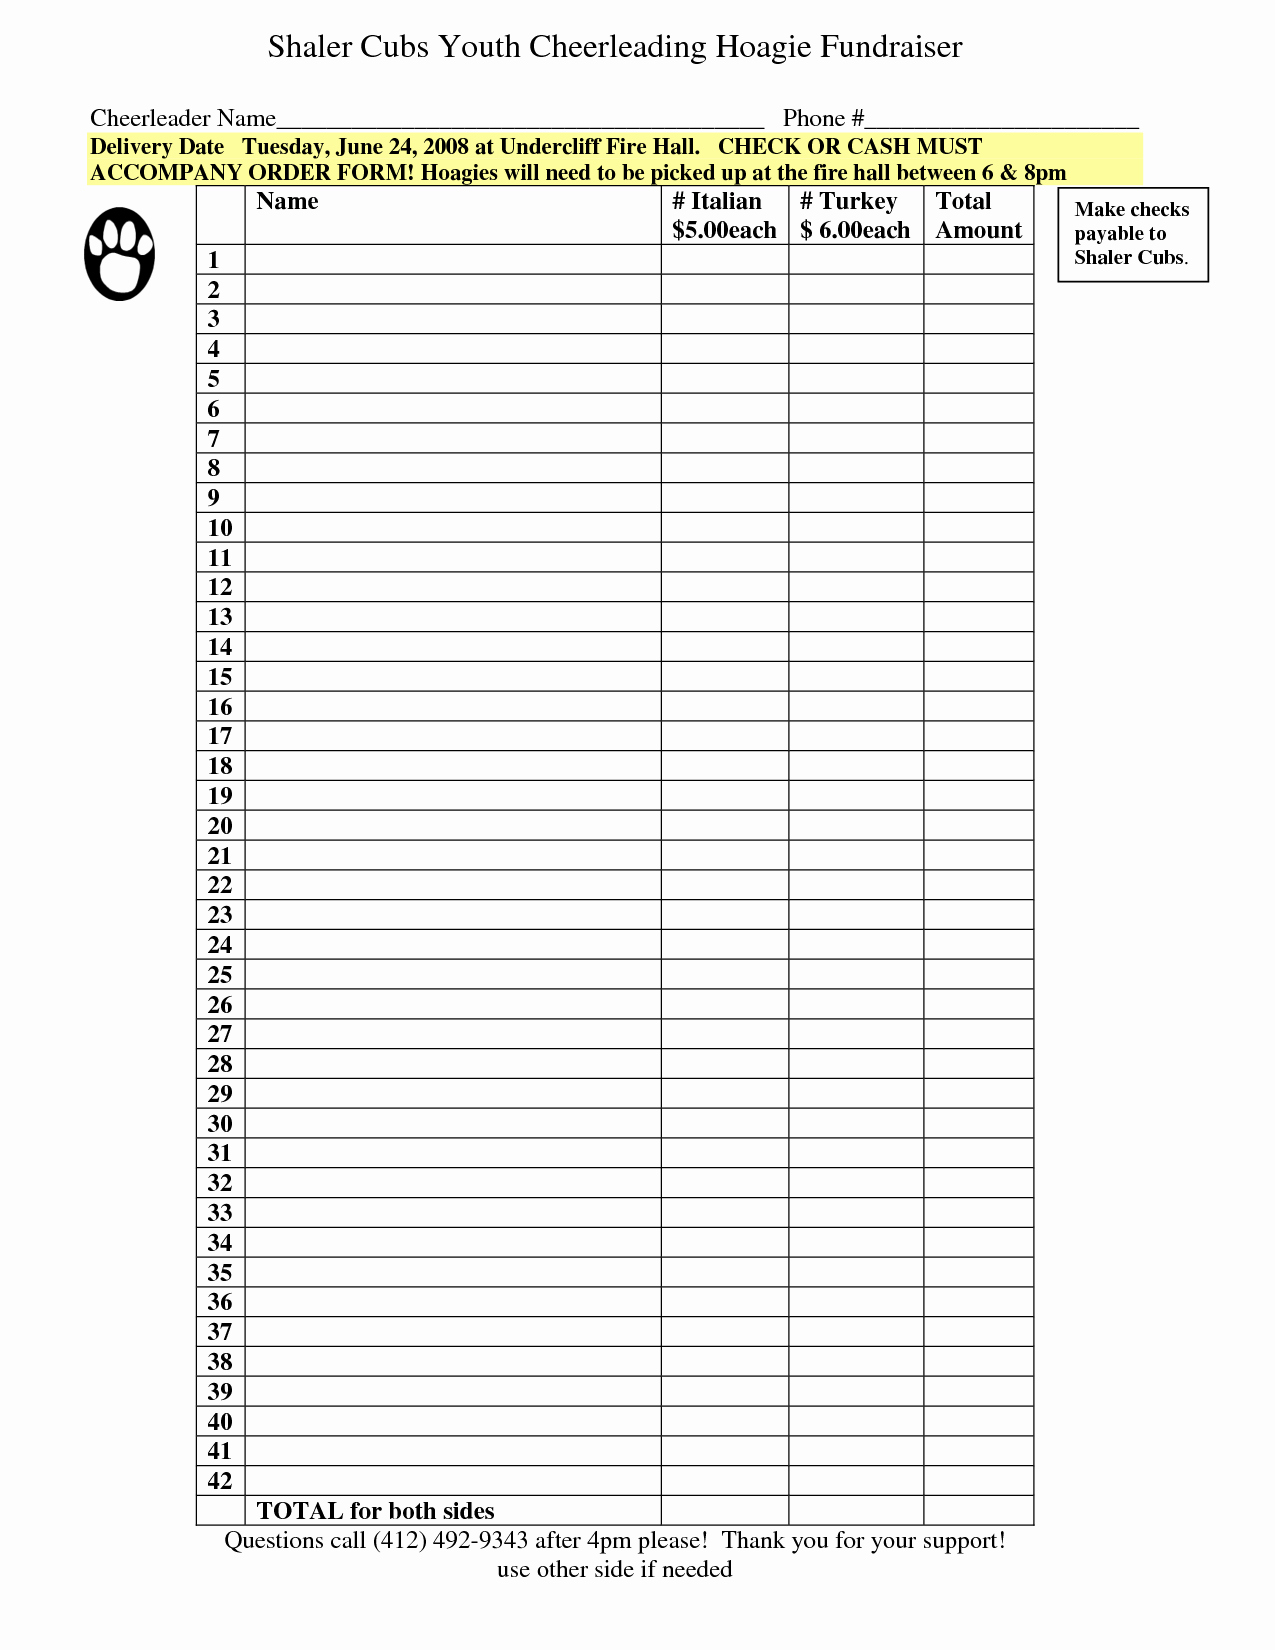 Fundraiser form Template Free Lovely 6 Best Of Free Printable Fundraiser forms Hoagie